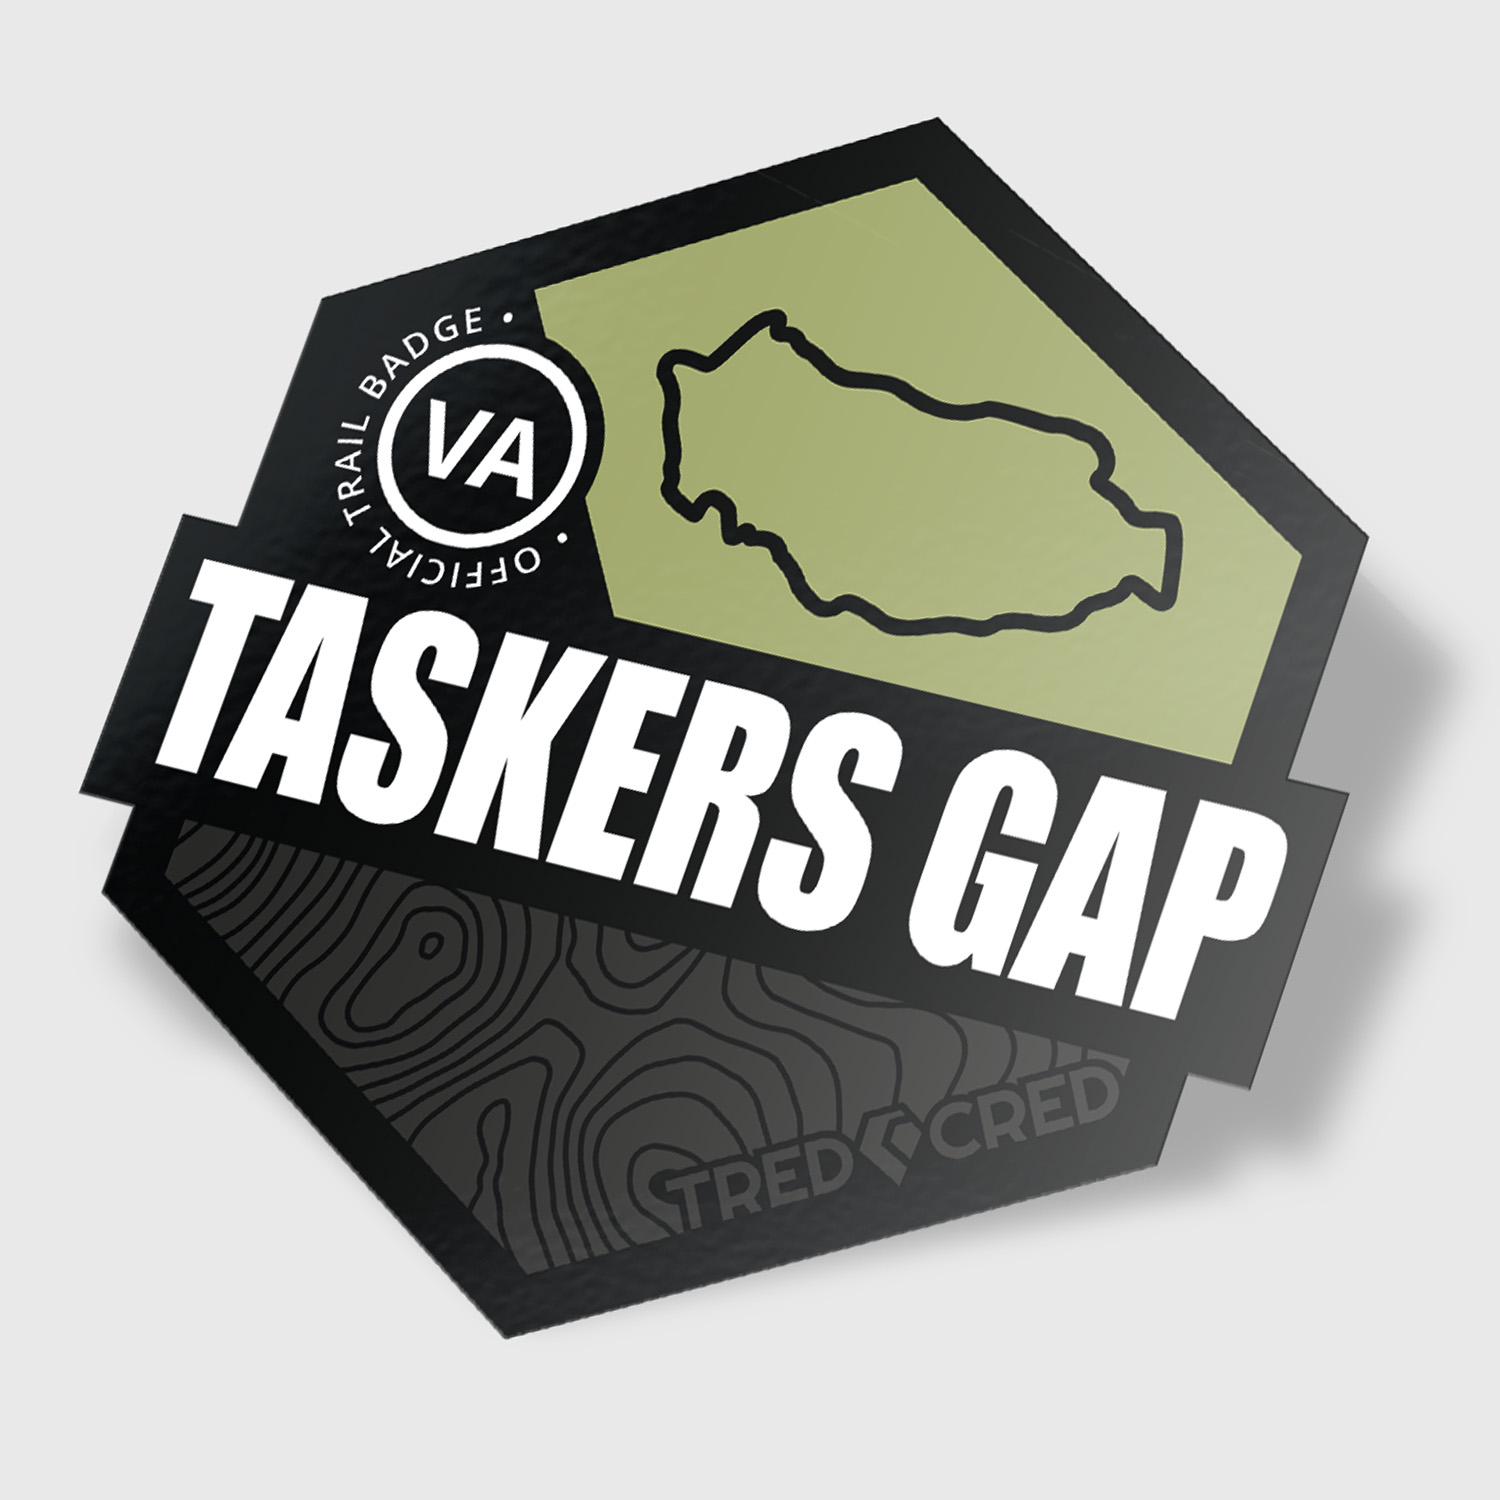 Wow pille Opdater Taskers Gap Trail Sticker - Tred Cred